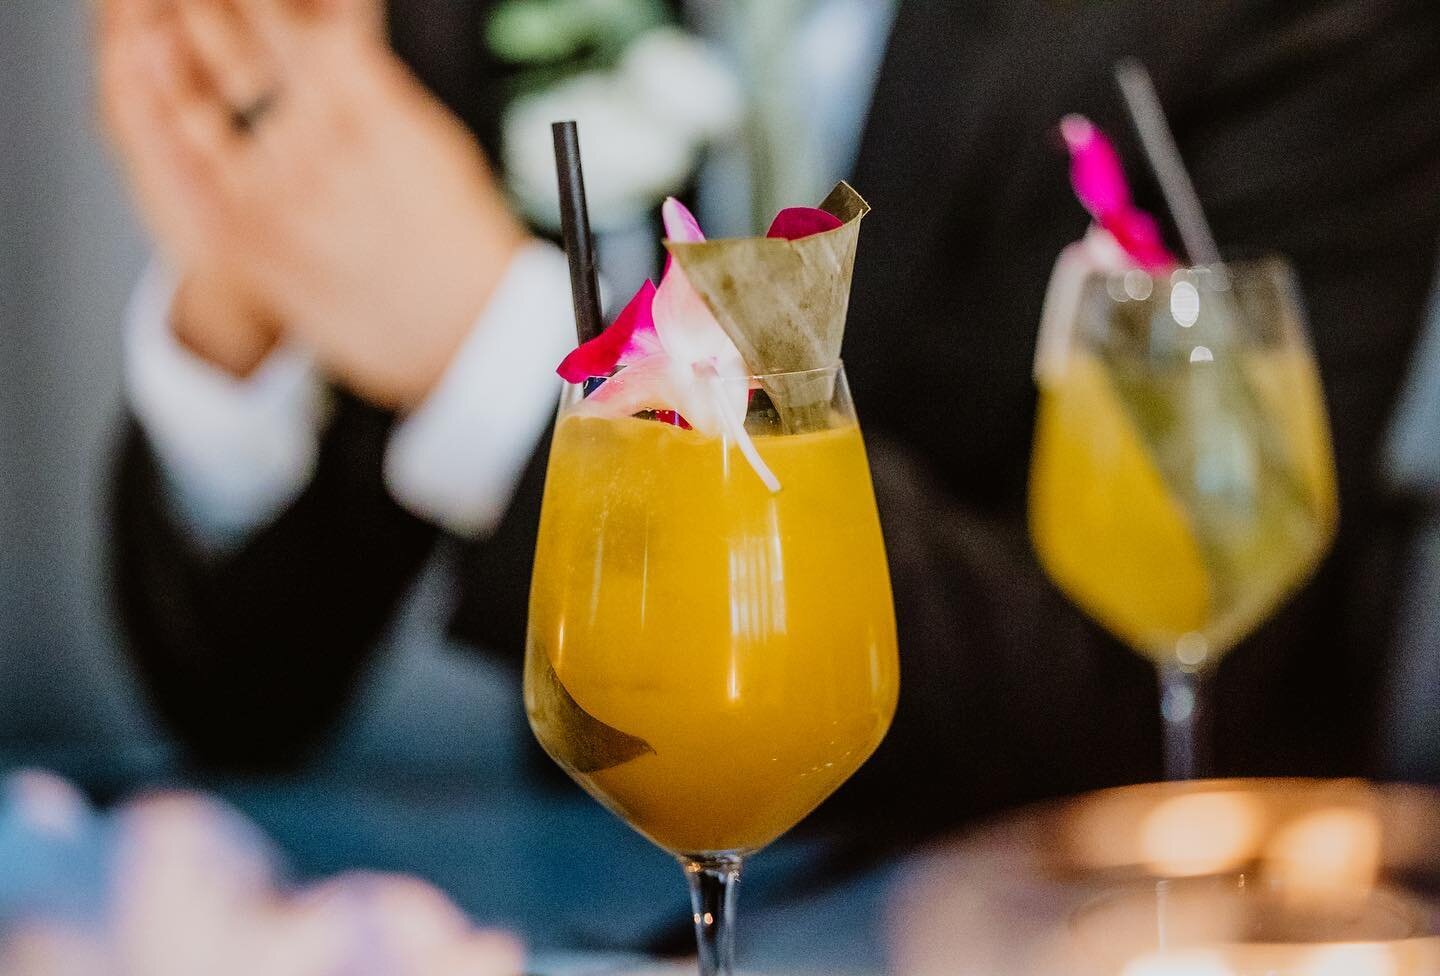 This sun ☀️ has us feeling thirsty this Thursday! 🍹

Throwback to our in house beverage team @hardlyshaken creating this customized cocktail for bride Veronica. Utilizing her Filipina heritage, they created a cocktail perfect for the sunny vibes ✨ 
